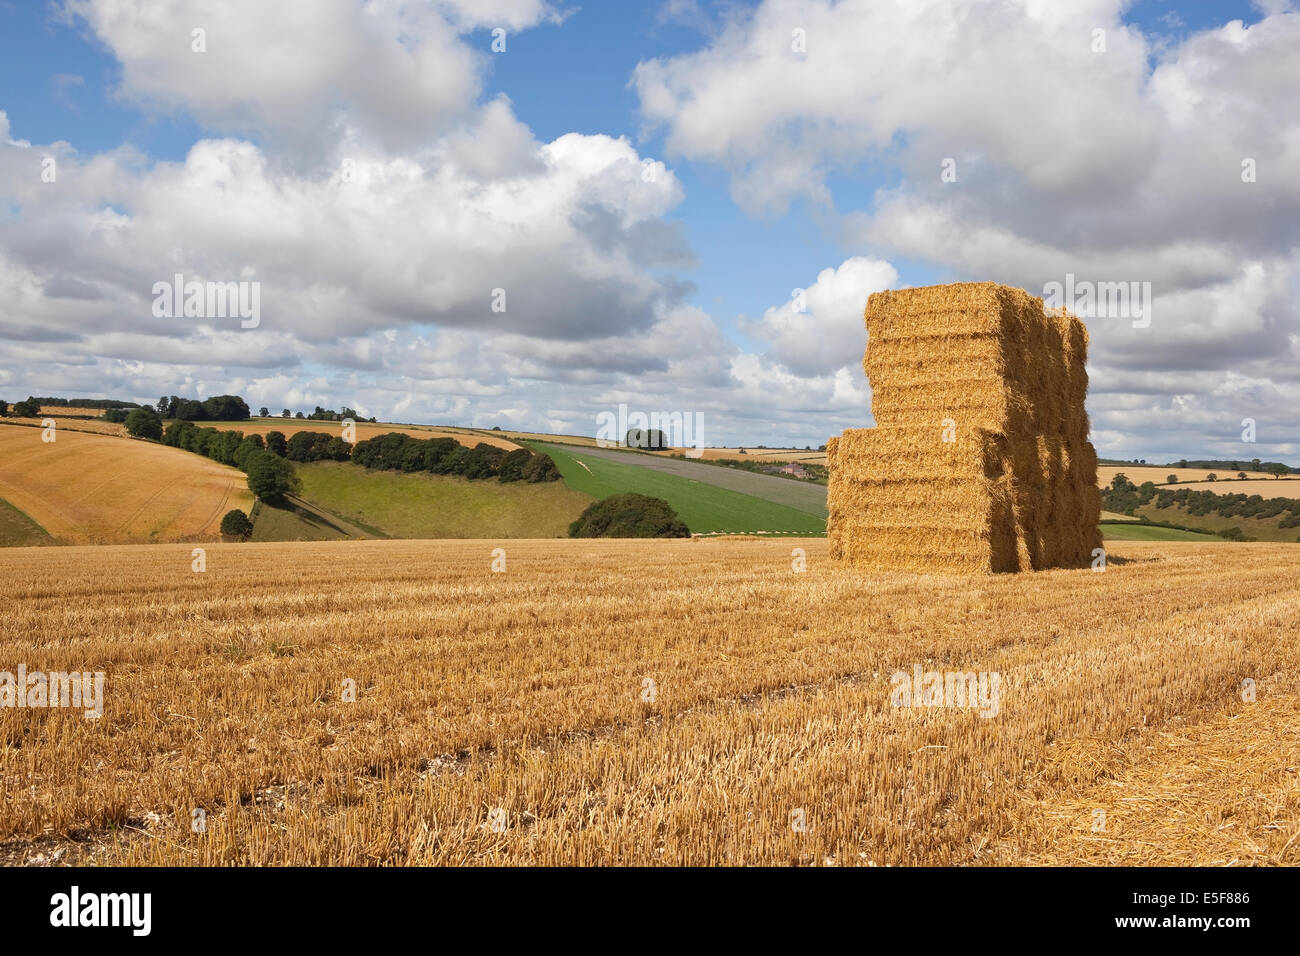 A stack of square bales in a golden hillside stubble field in the Yorkshire wolds England under a sunny blue cloudy sky. Stock Photo